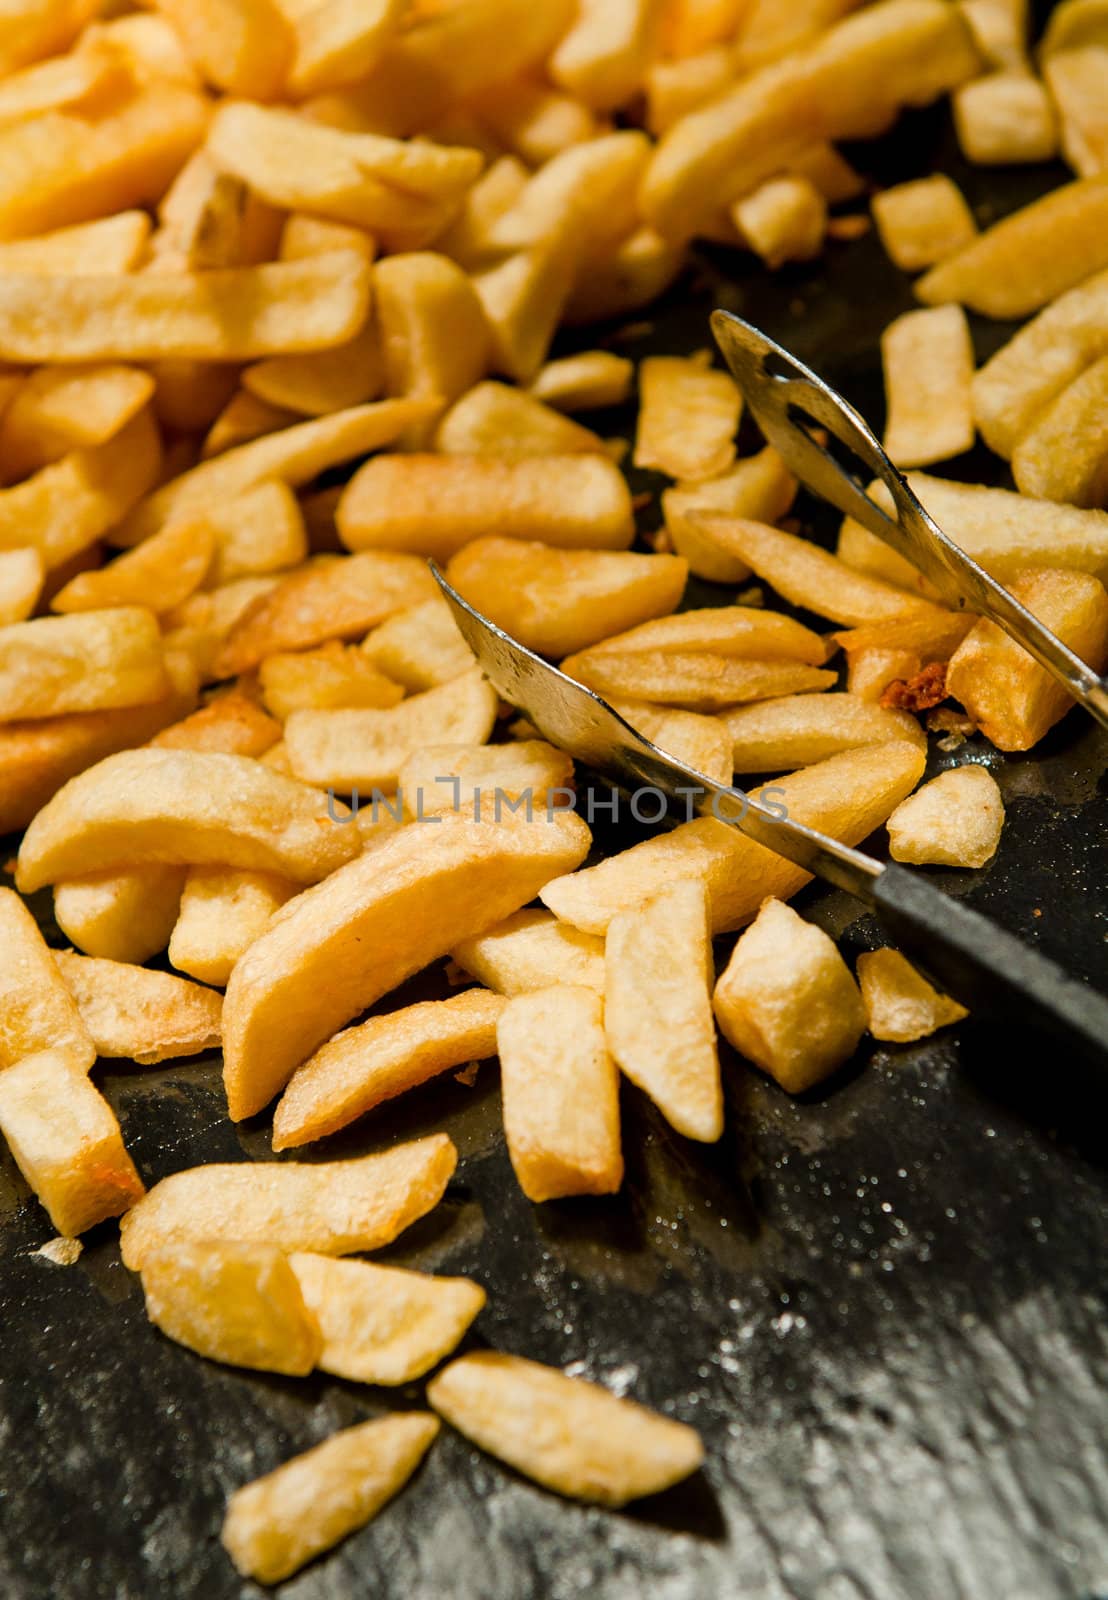 bunch of french fries on a black wooden board (shallow DOF)